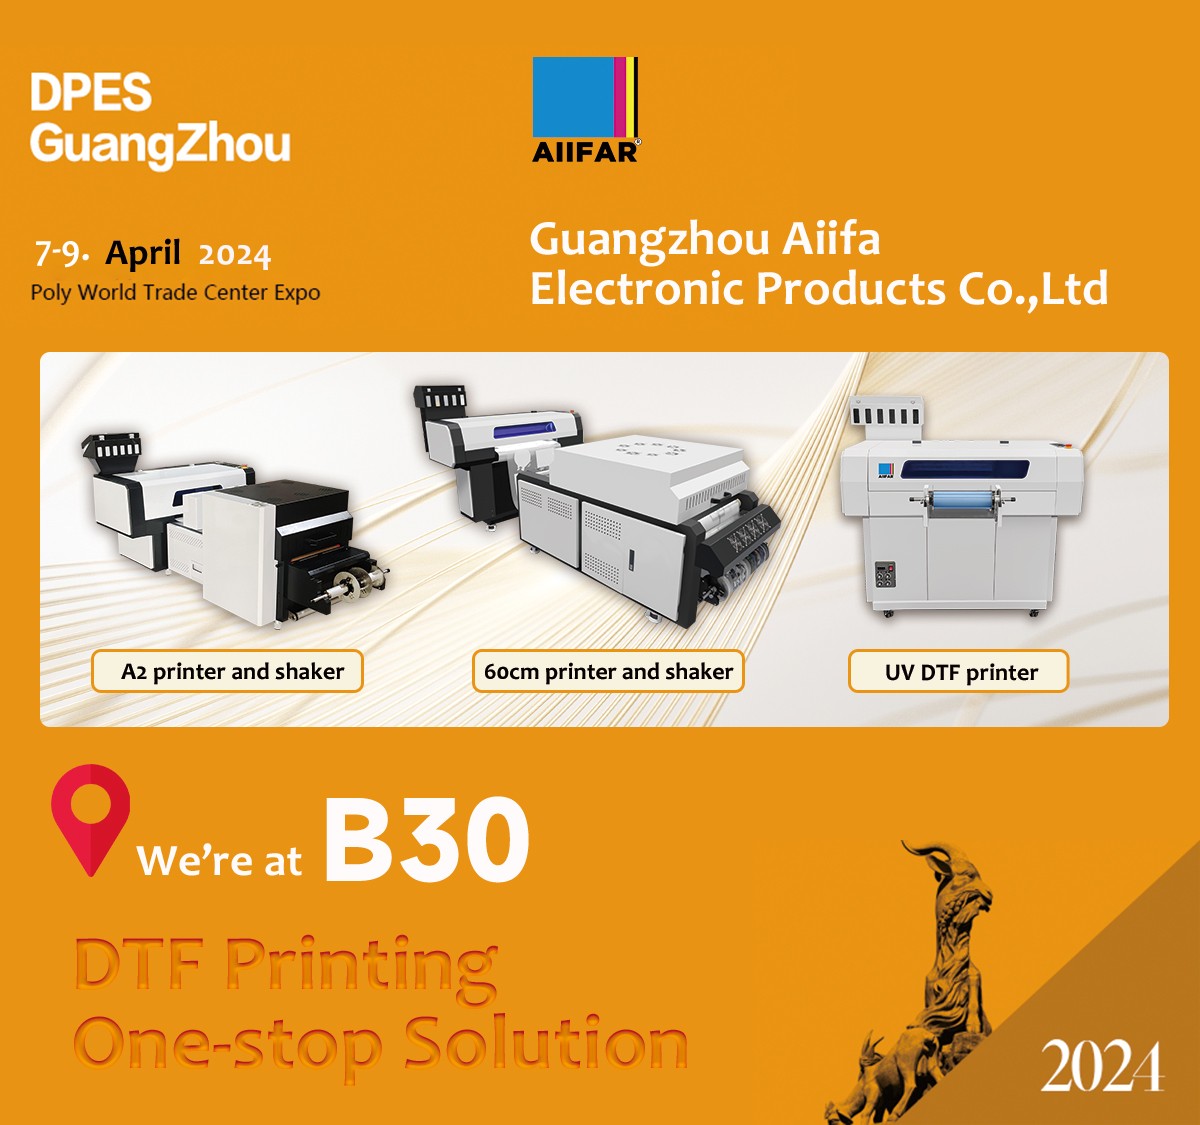 2024 Guangzhou DPES Textile Printing & Embroidery Expo